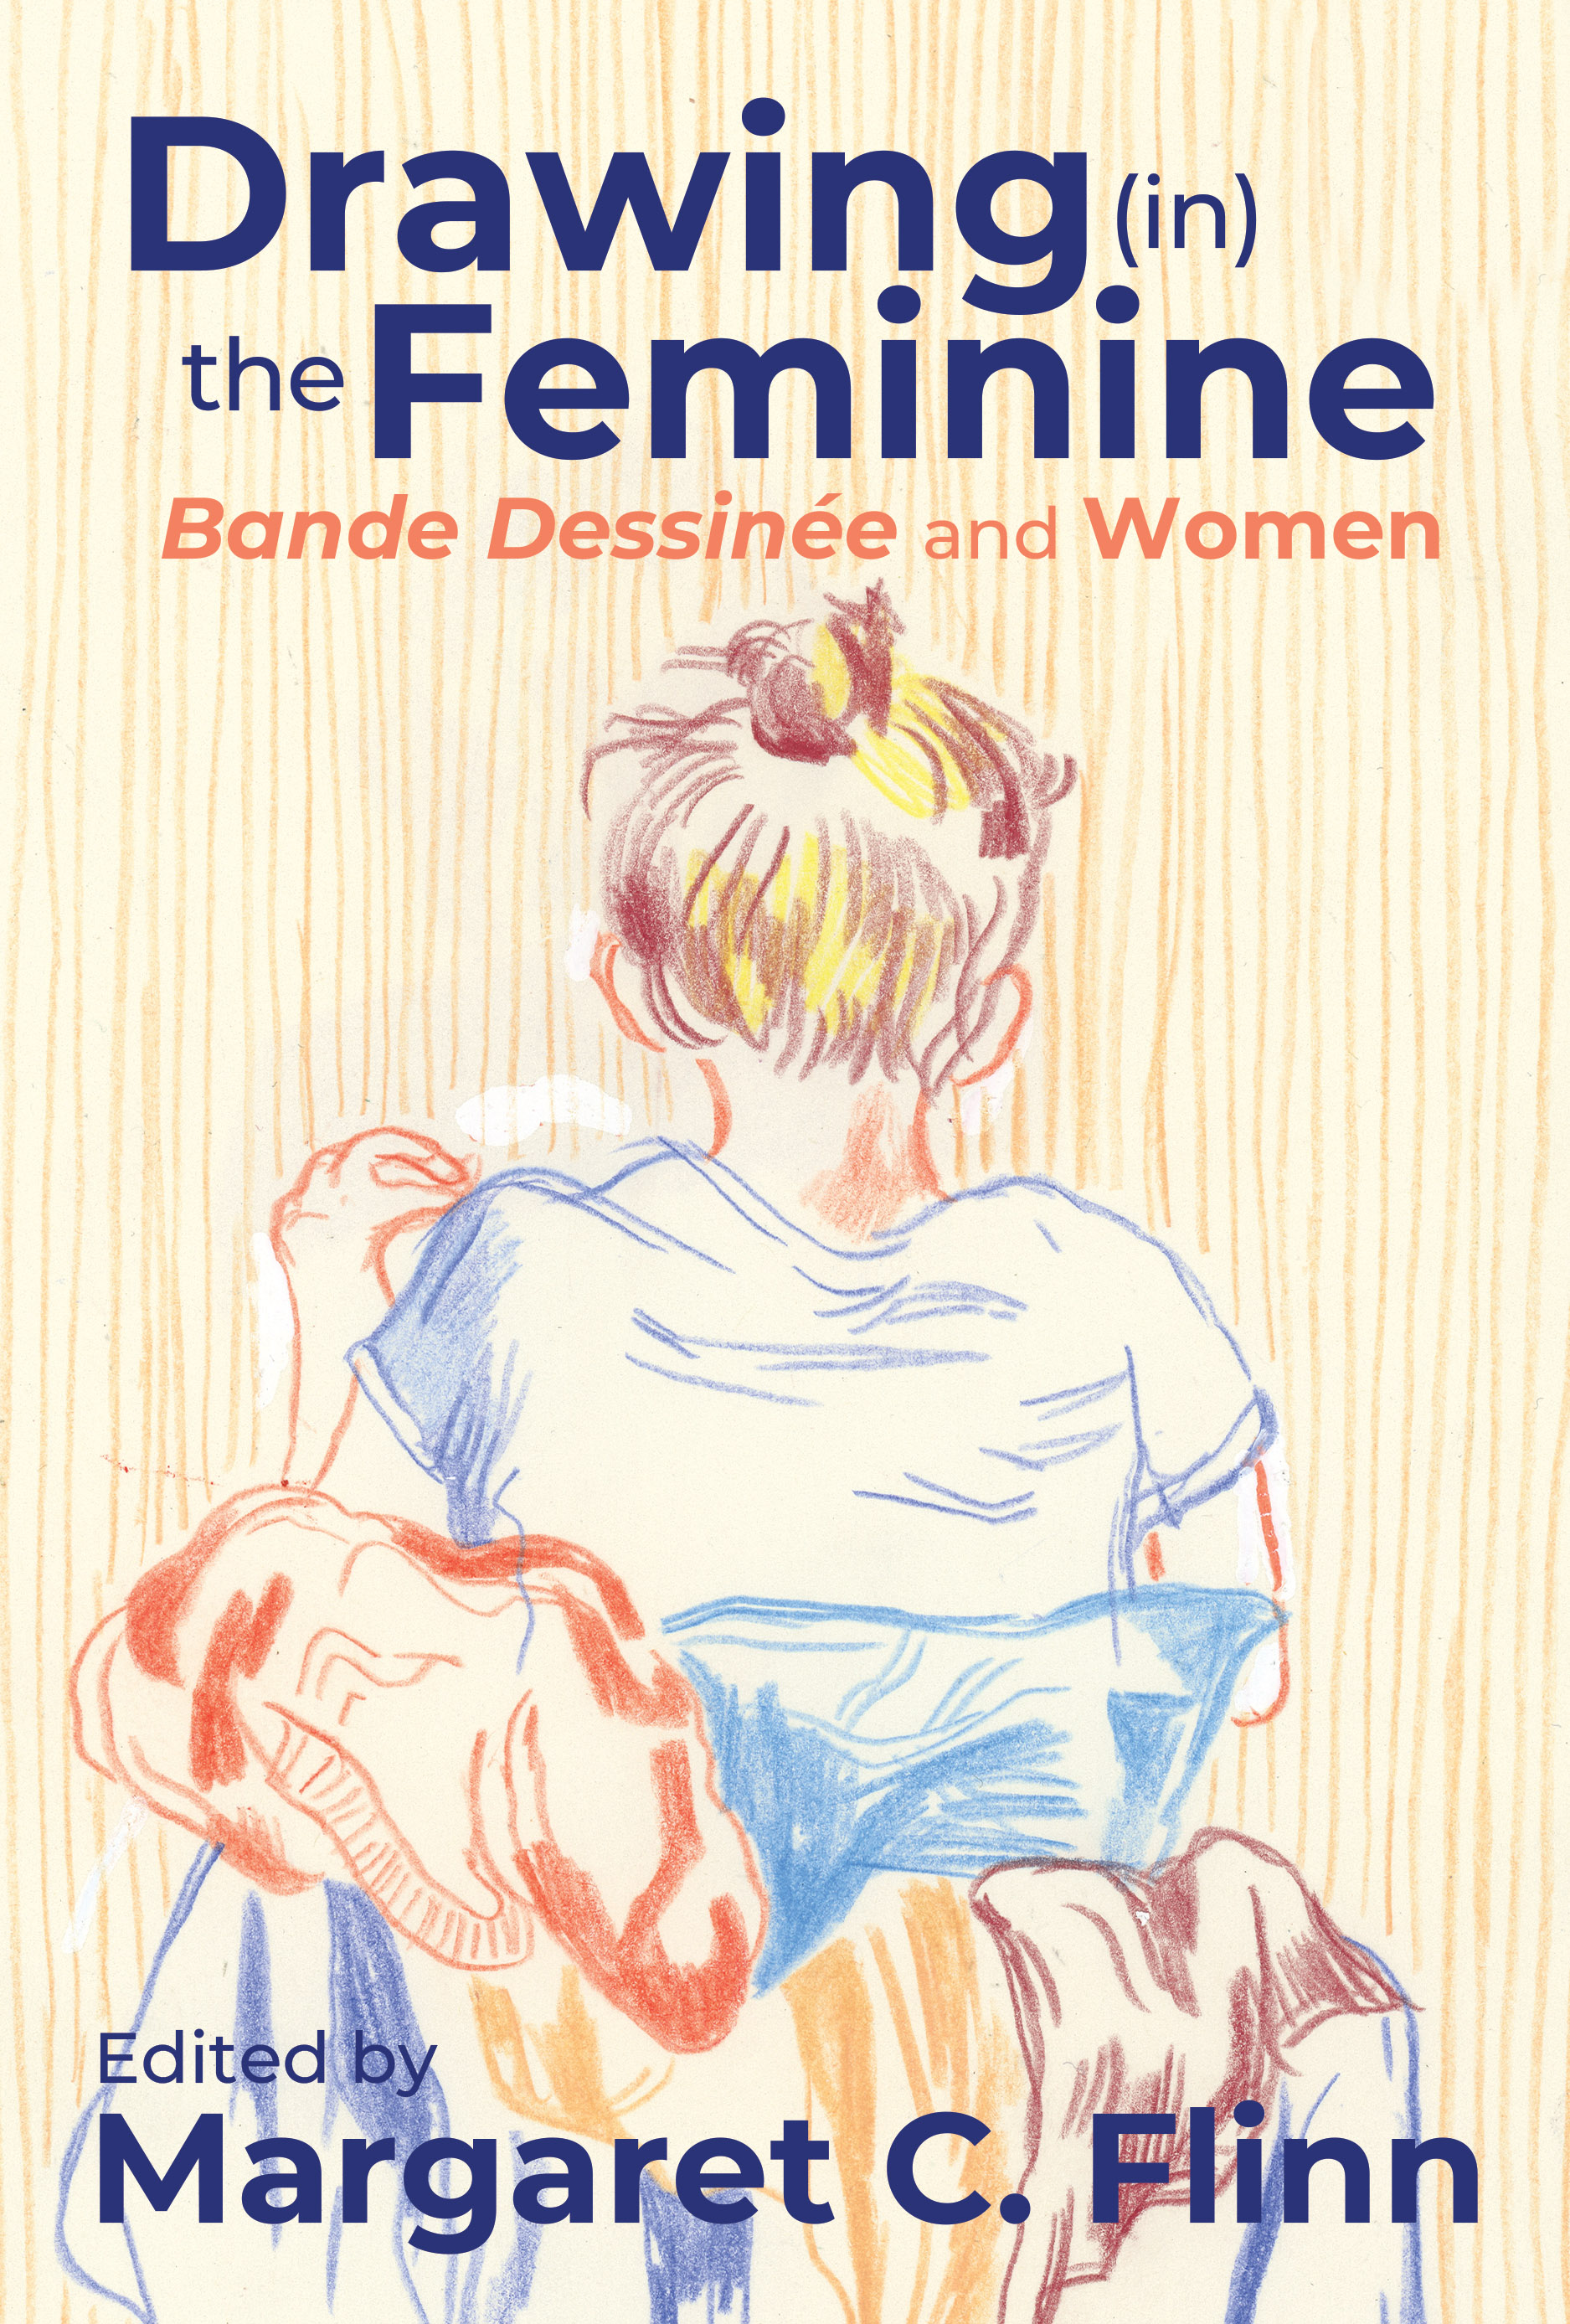 Drawing (in) the Feminine: Bande Dessinée and Women book cover